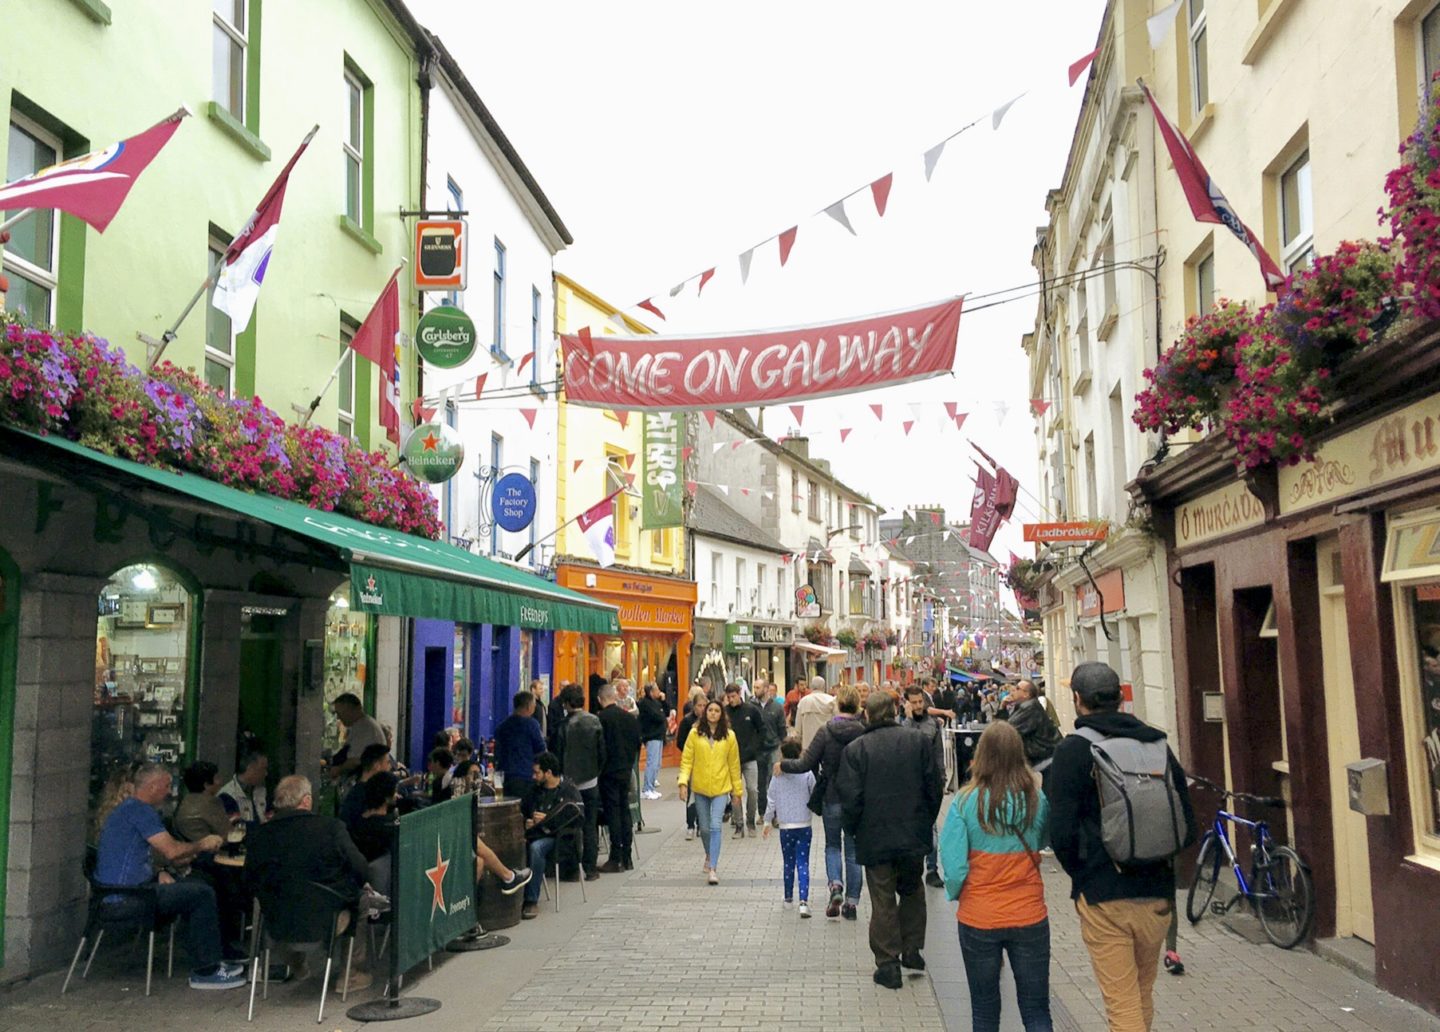 9 Things to Do in Galway (Other than Pubs!)